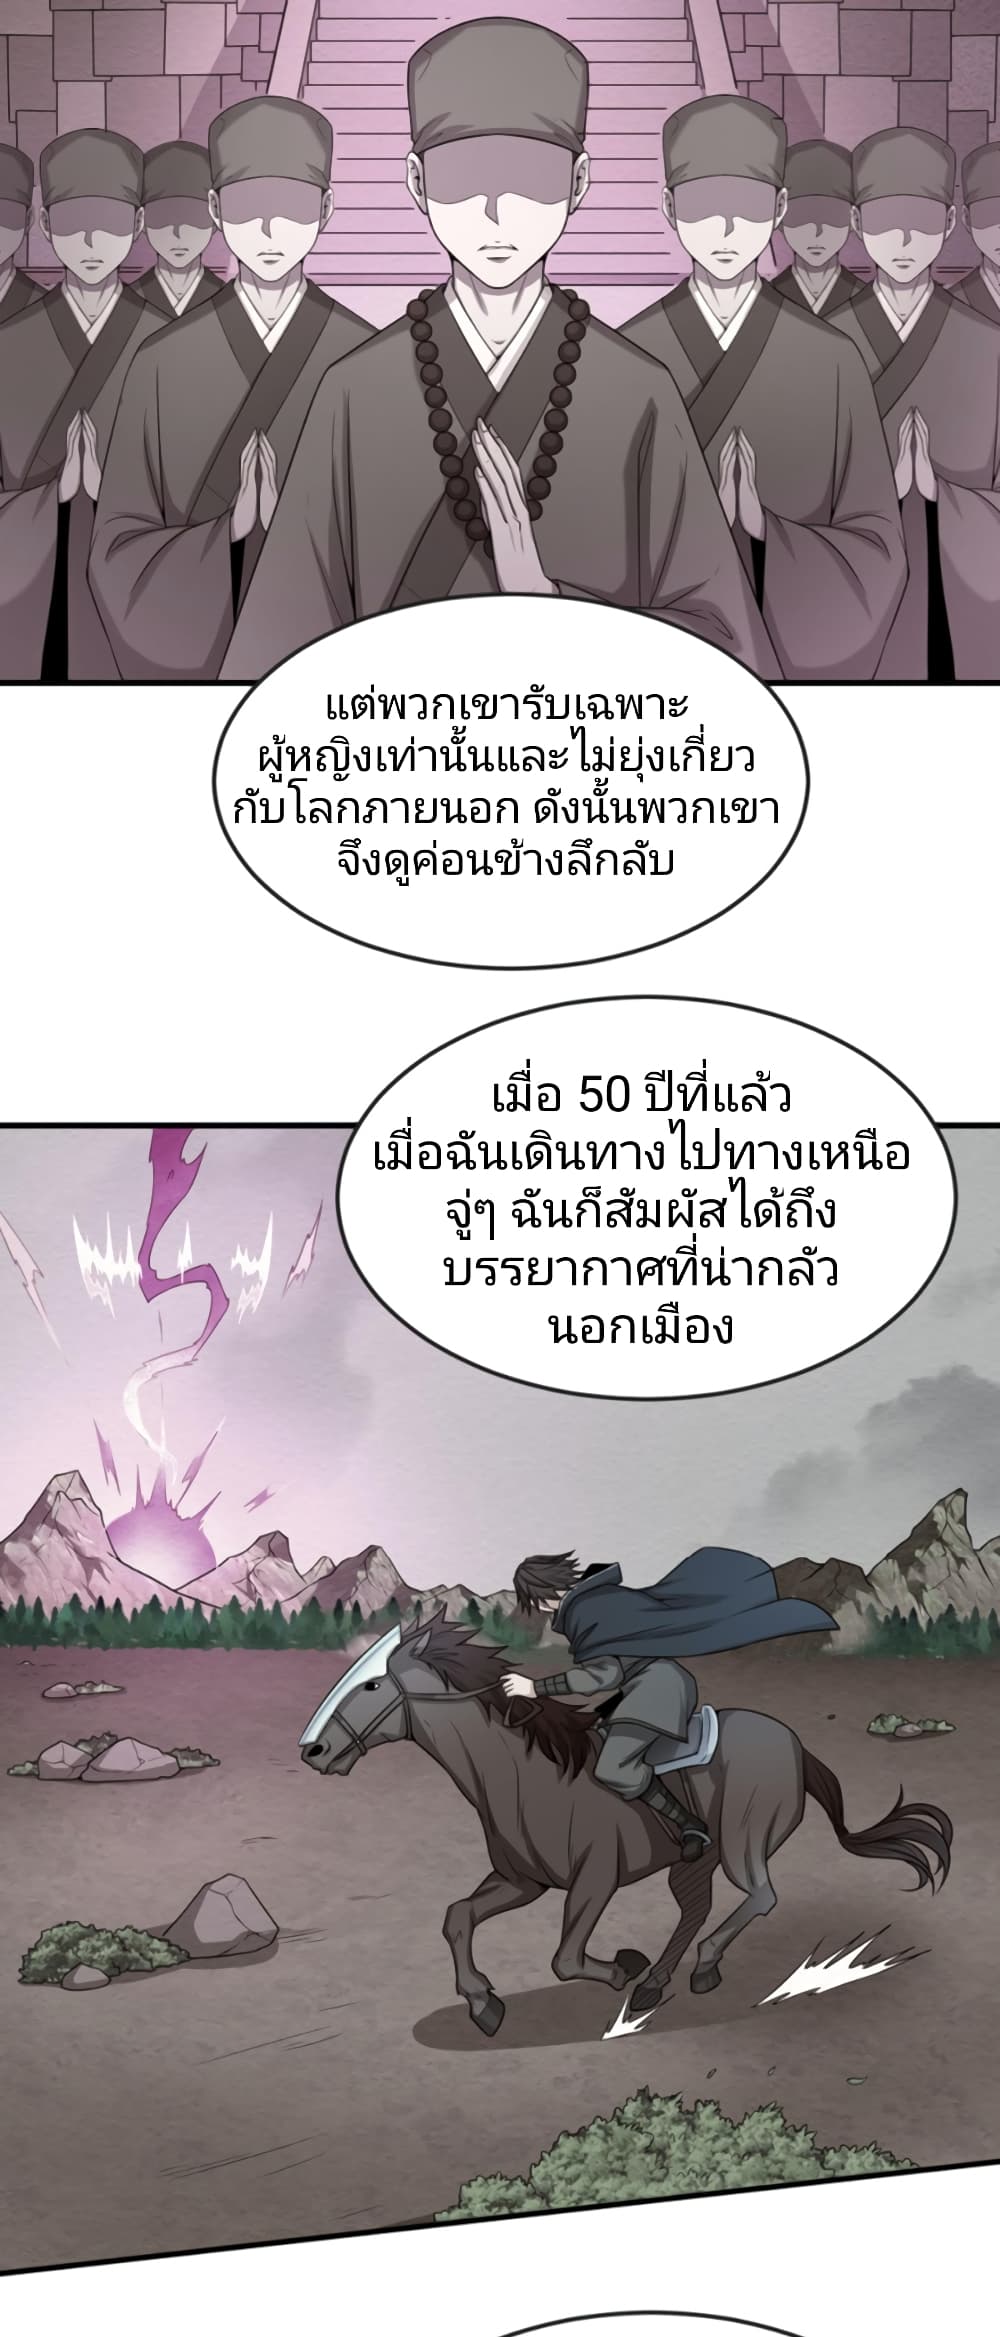 The Age of Ghost Spirits à¸à¸­à¸à¸à¸µà¹ 41 (3)